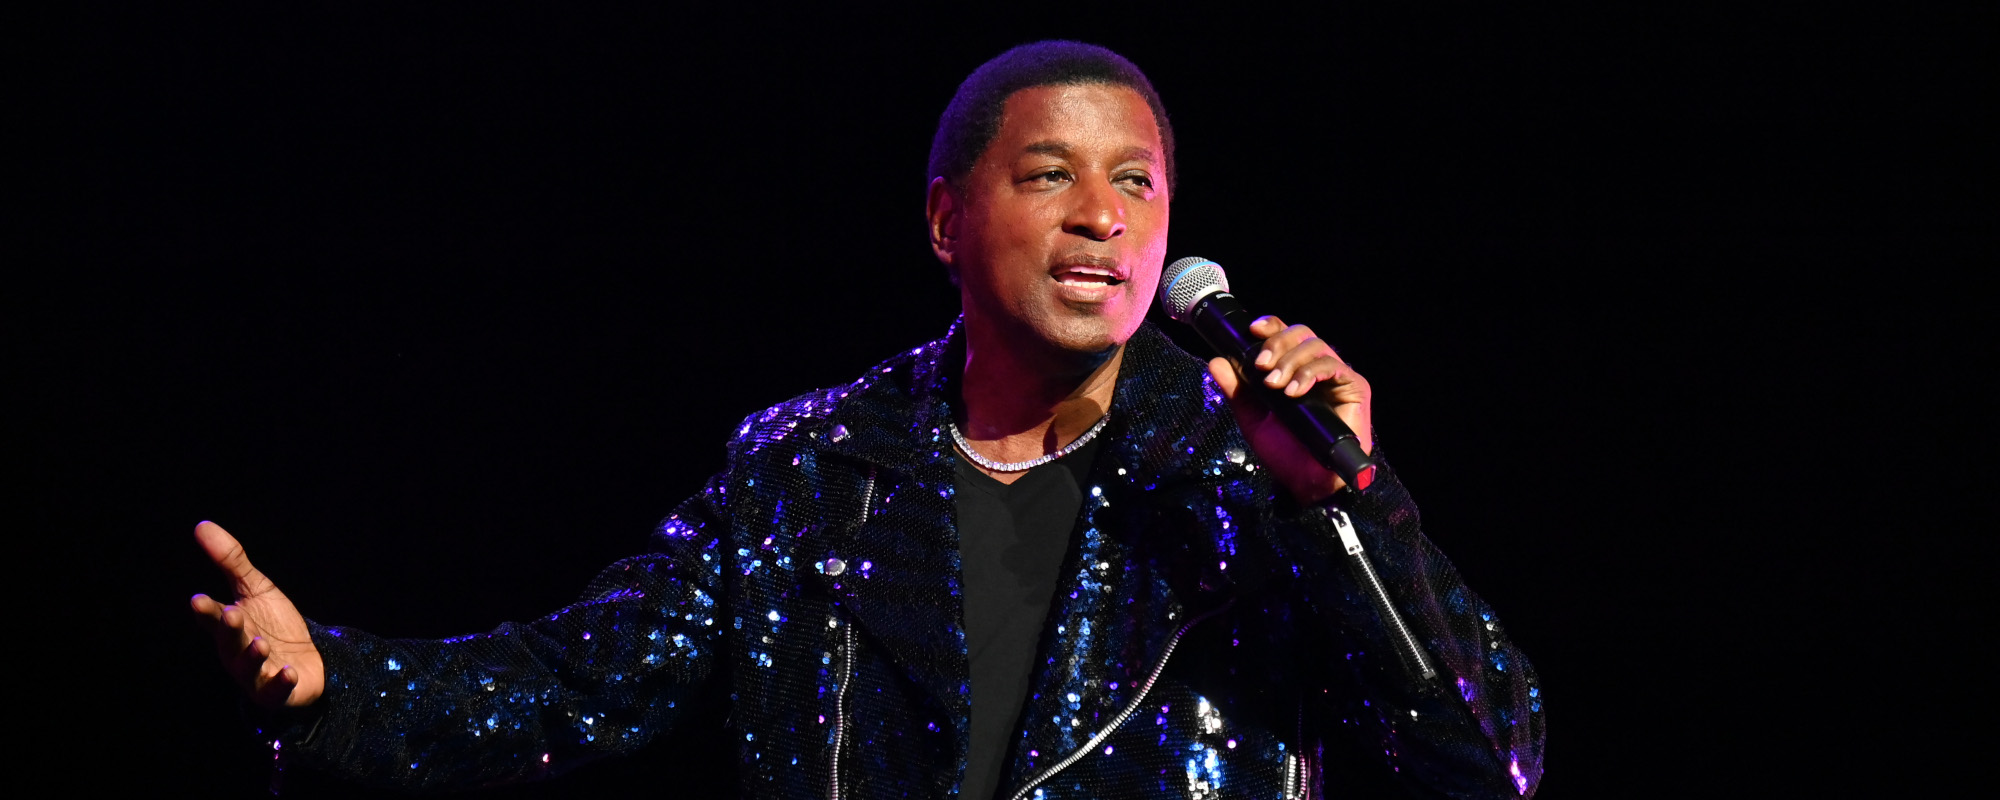 10 Songs You Didn’t Know Babyface Wrote for Other Artists